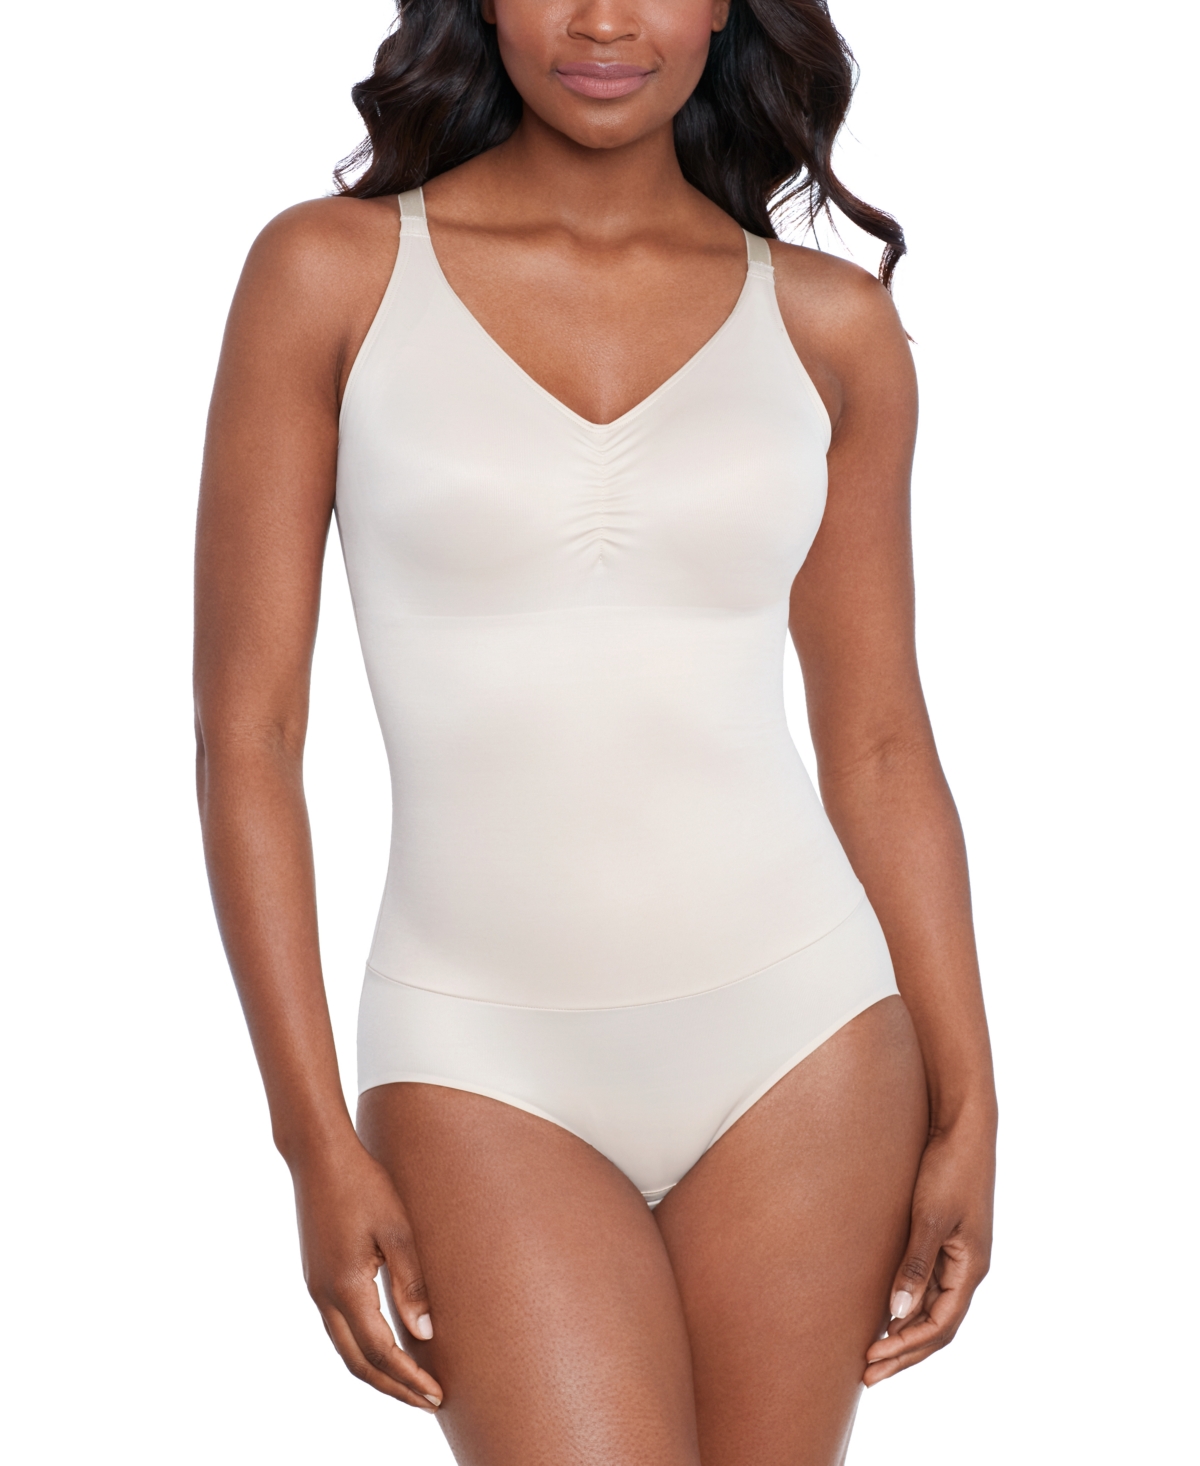 Shop Miraclesuit Women's Shapewear Firm Comfy Curves Wireless Bodybriefer 2510 In Warm Beige